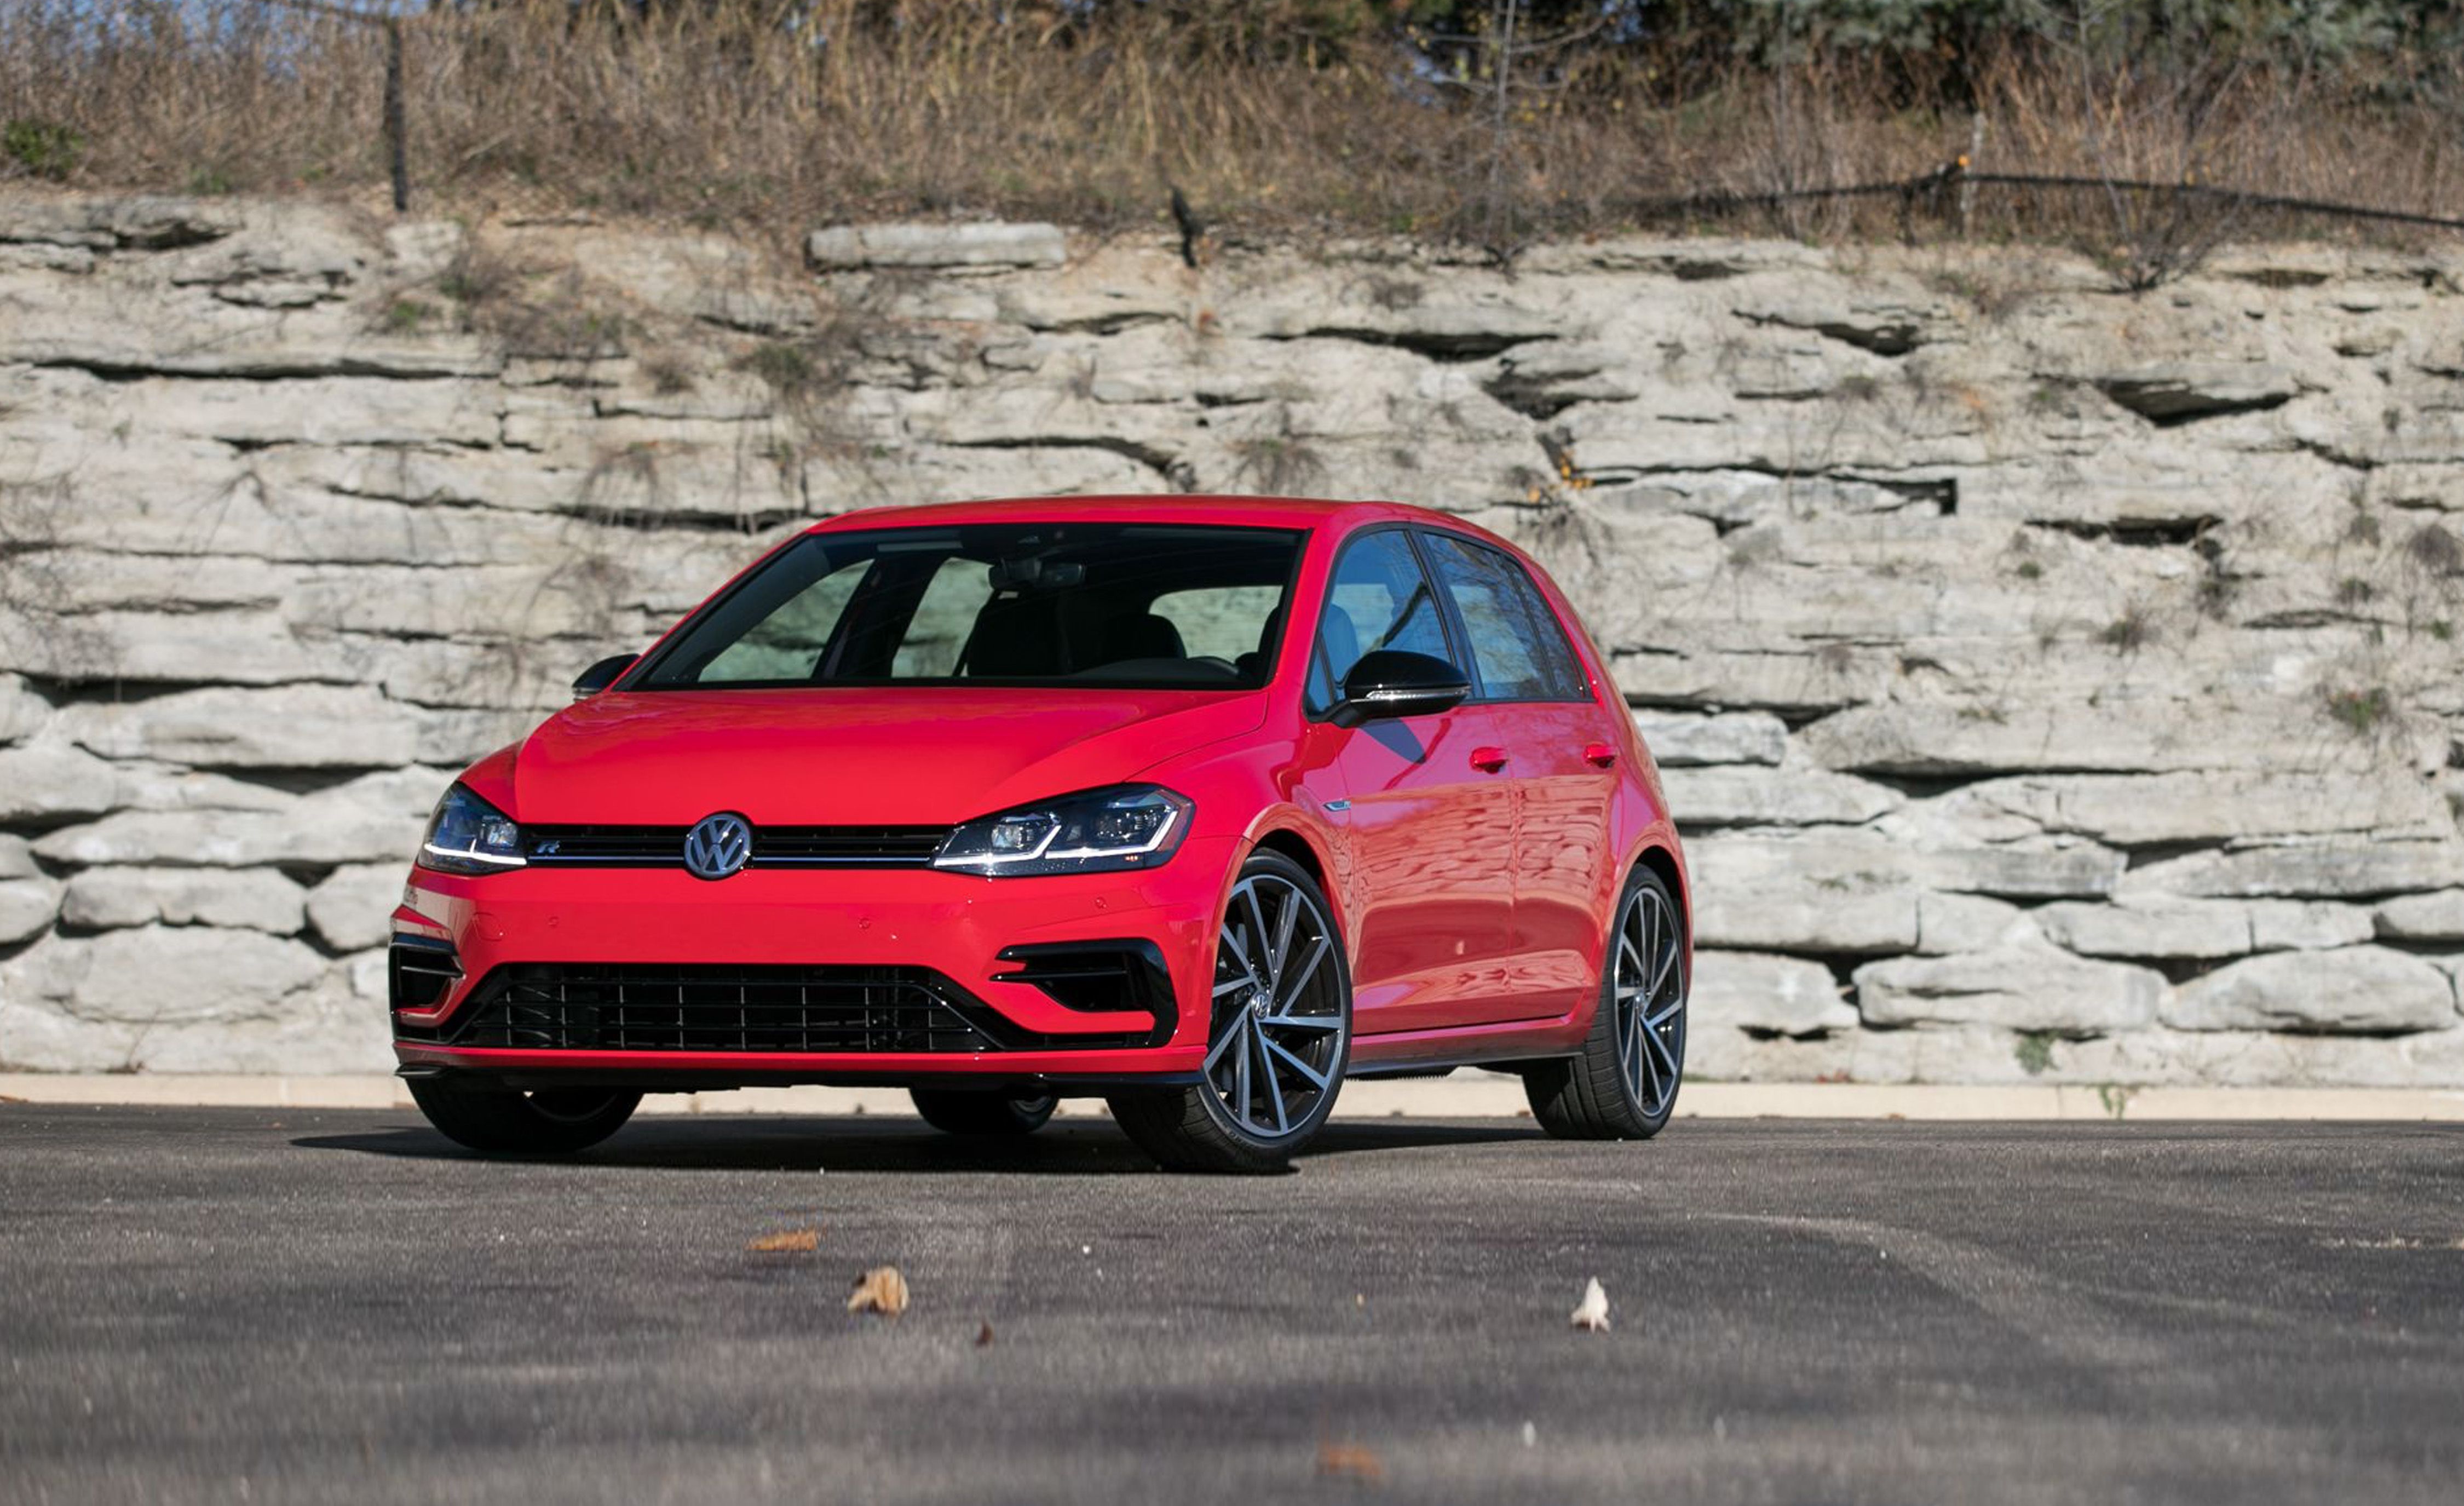 VW Golf R Buyer's Guide - The Definitive Guide To The Mk7 Golf R